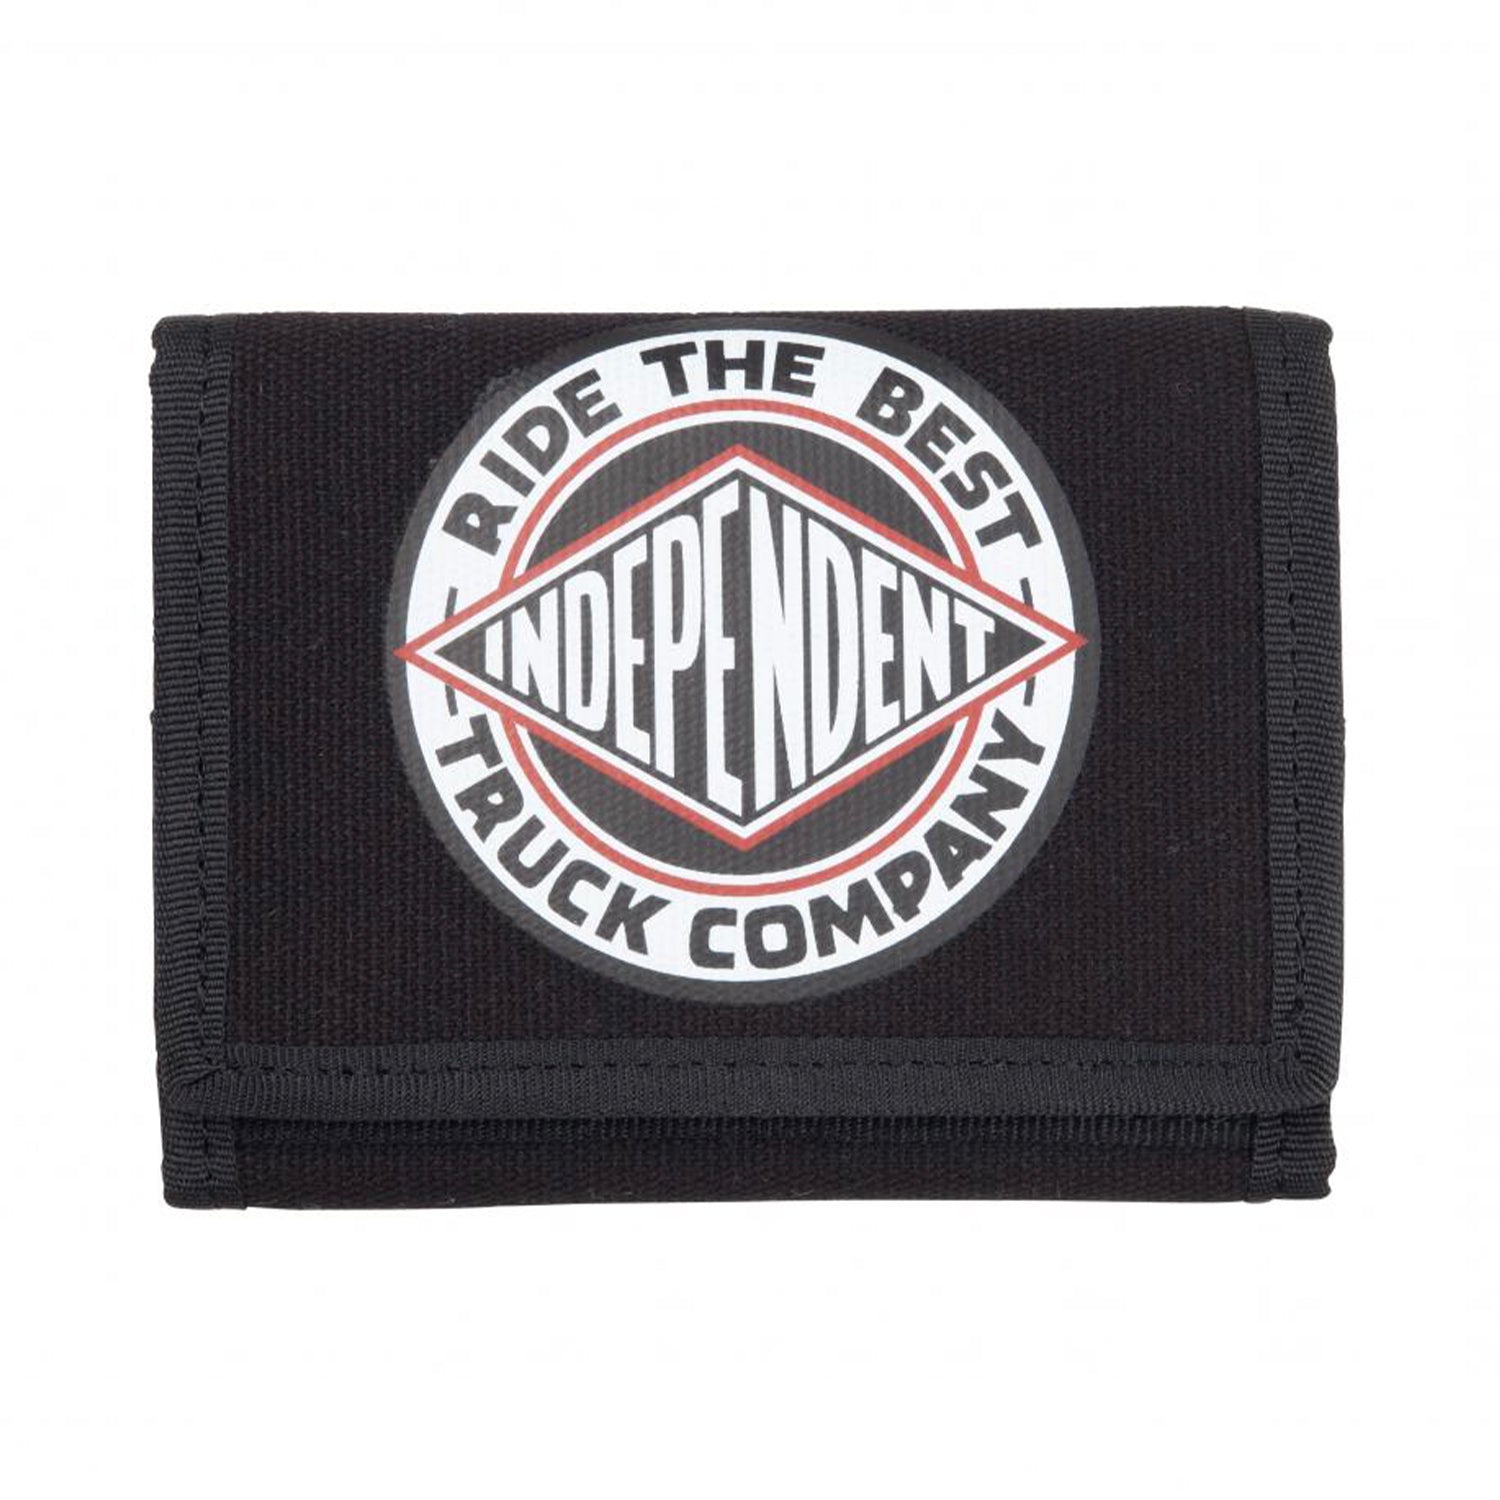 Independent Ride The Best Wallet - Black - Prime Delux Store